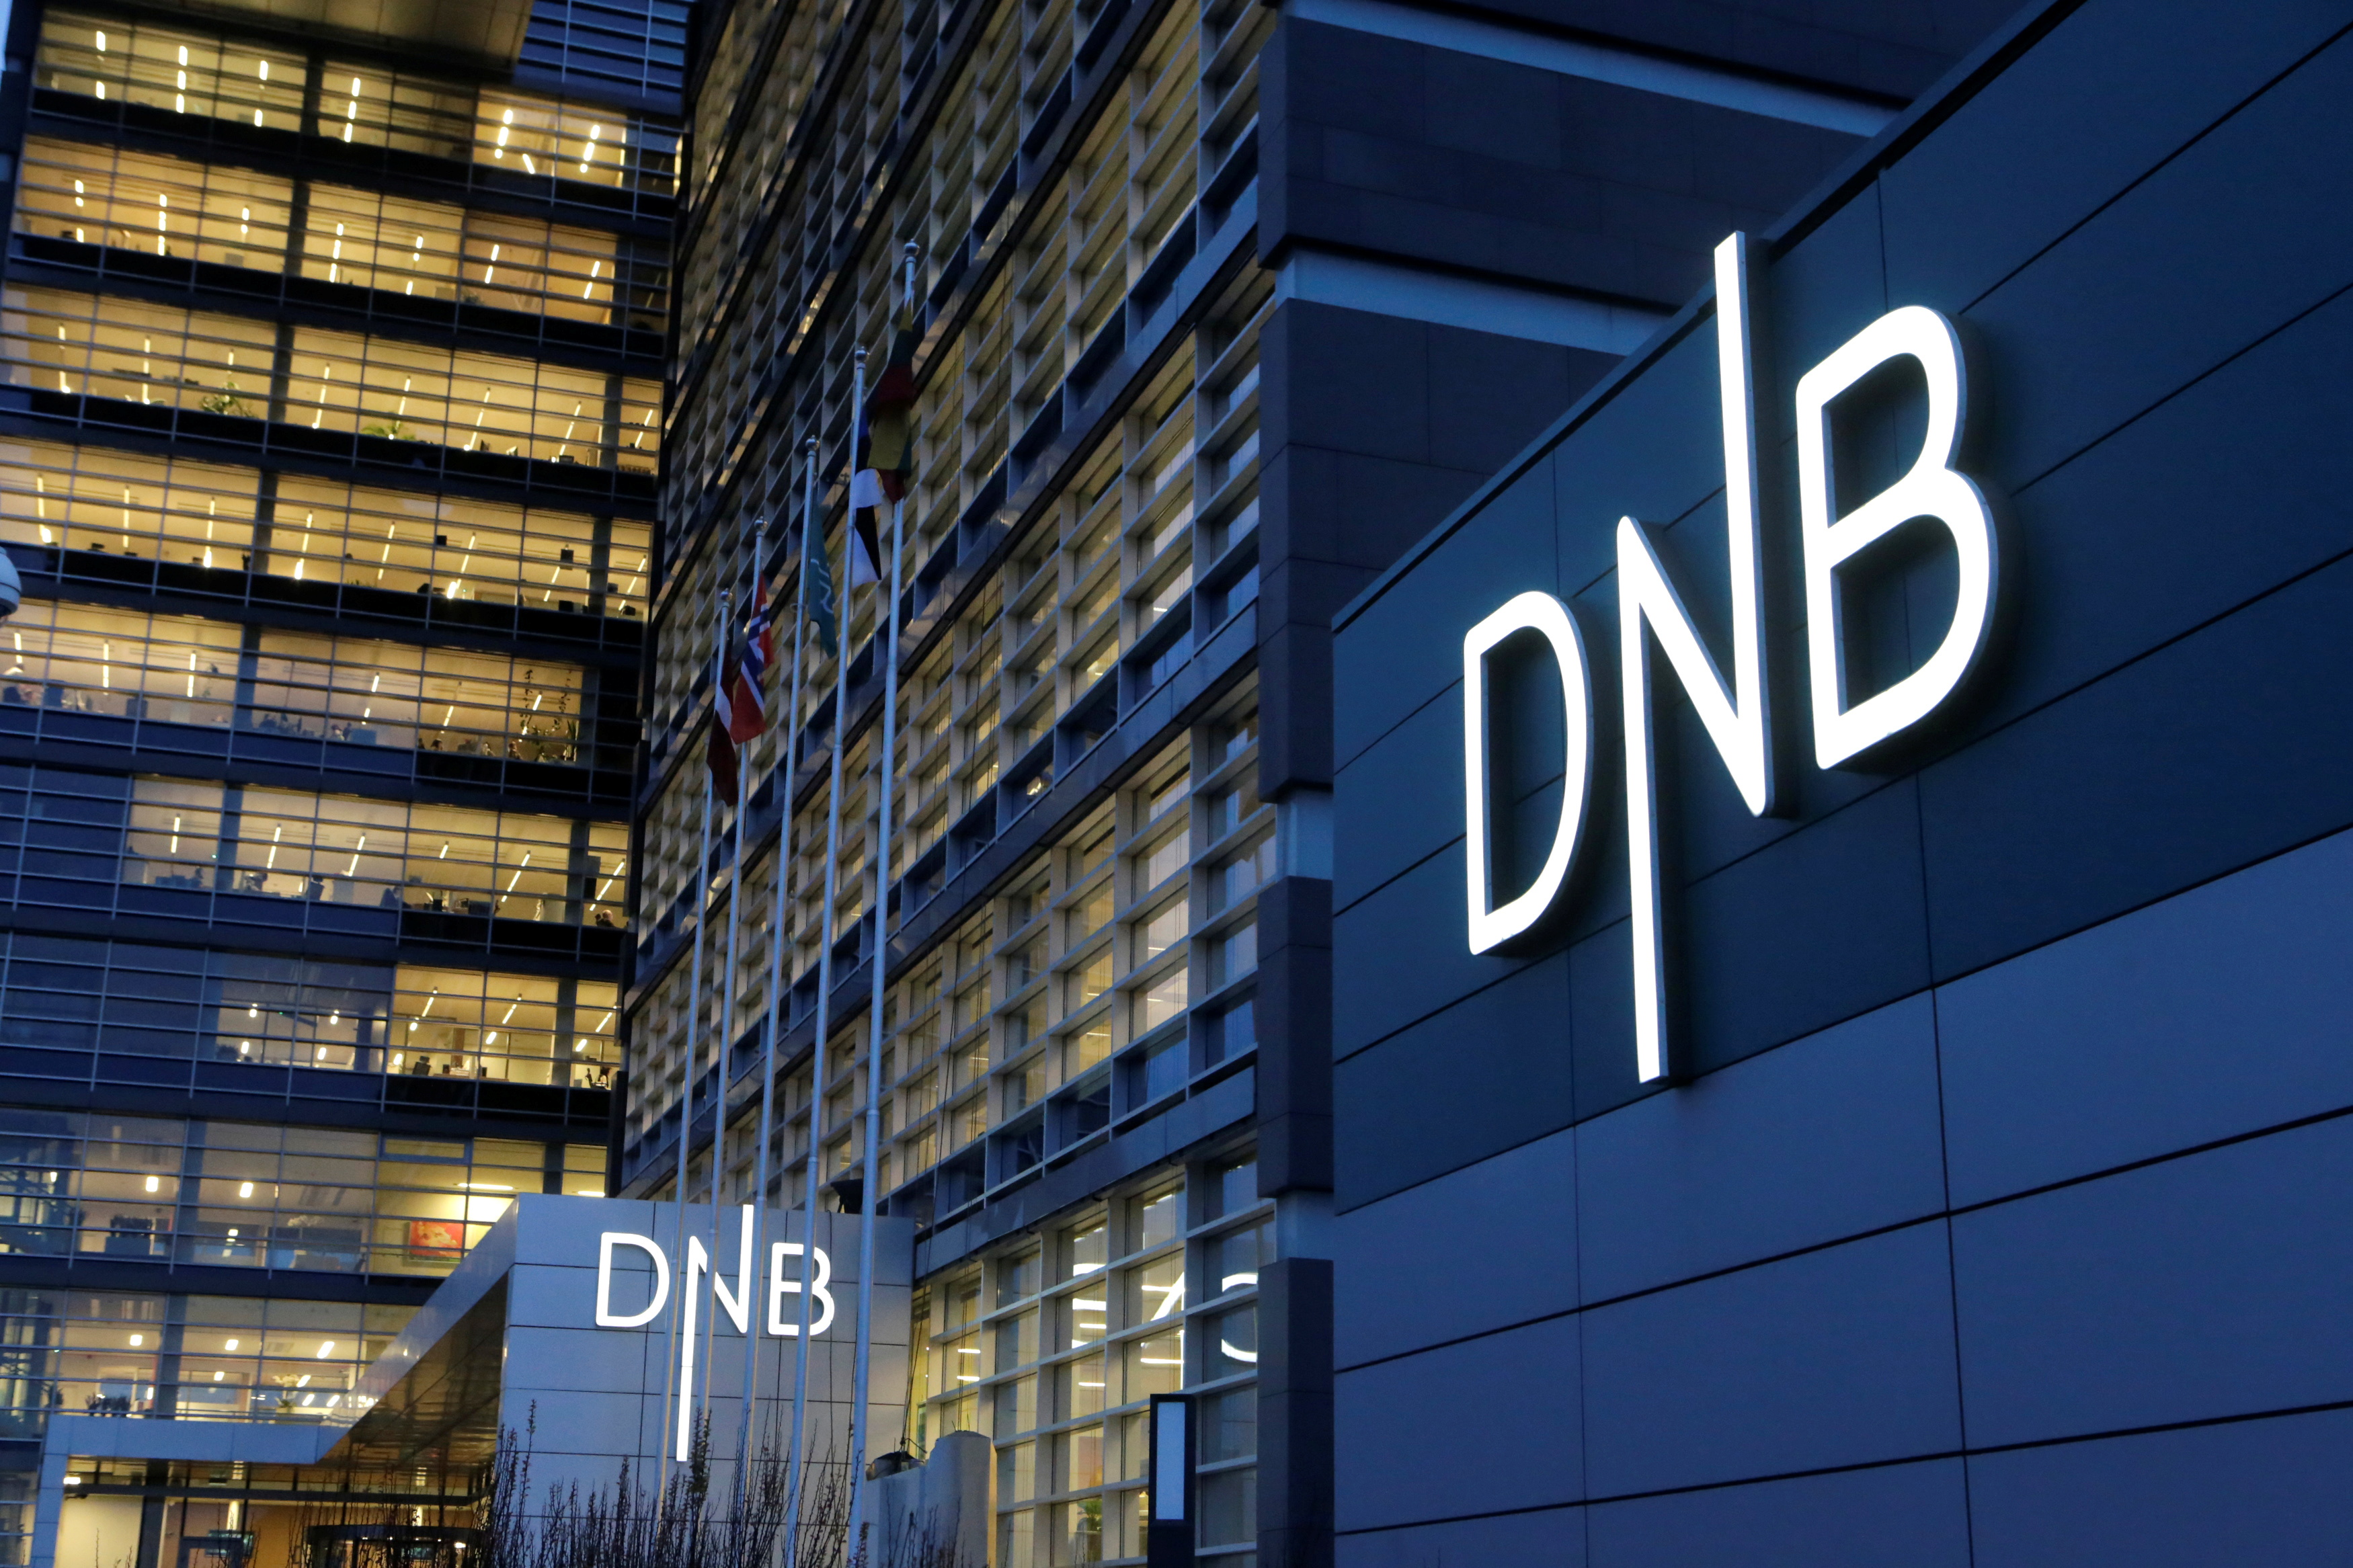 Norway's DNB Q2 beat forecasts on the back of rate hikes